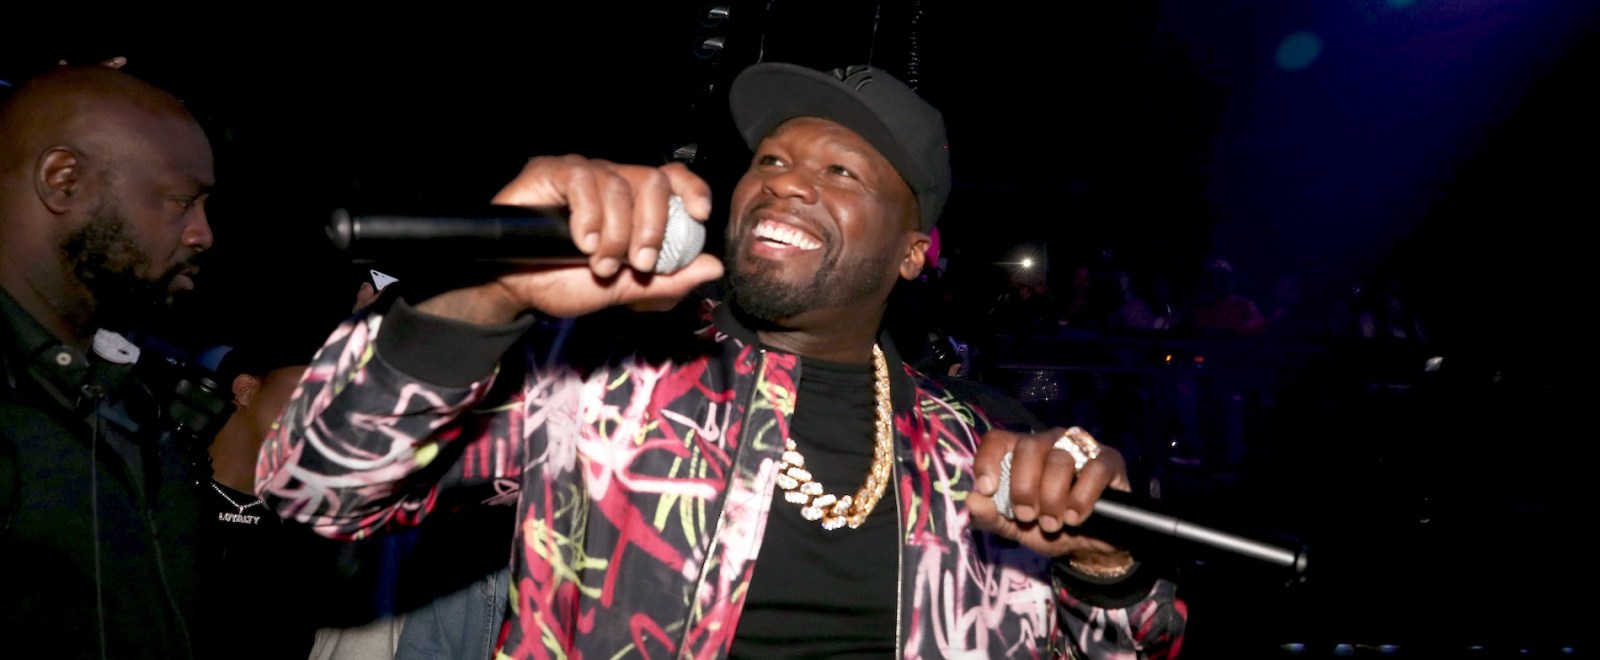 50 Cent Is All For Tom Brady’s Use Of ‘Many Men’ To Celebrate His Super Bowl Win